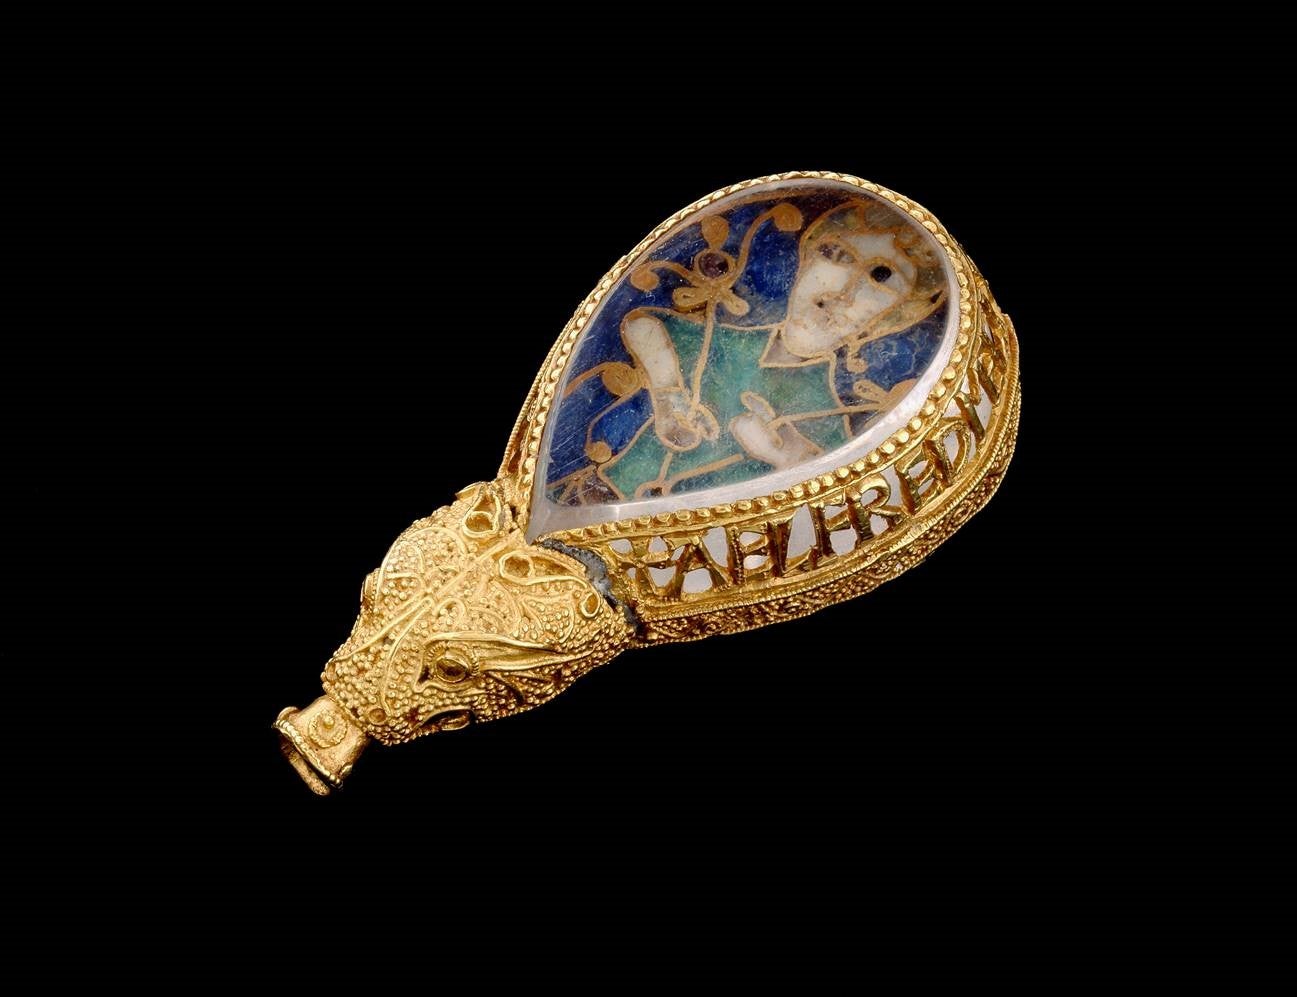 The Alfred Jewel, found in a Somerset field in 1693, dates back to the late 9th century